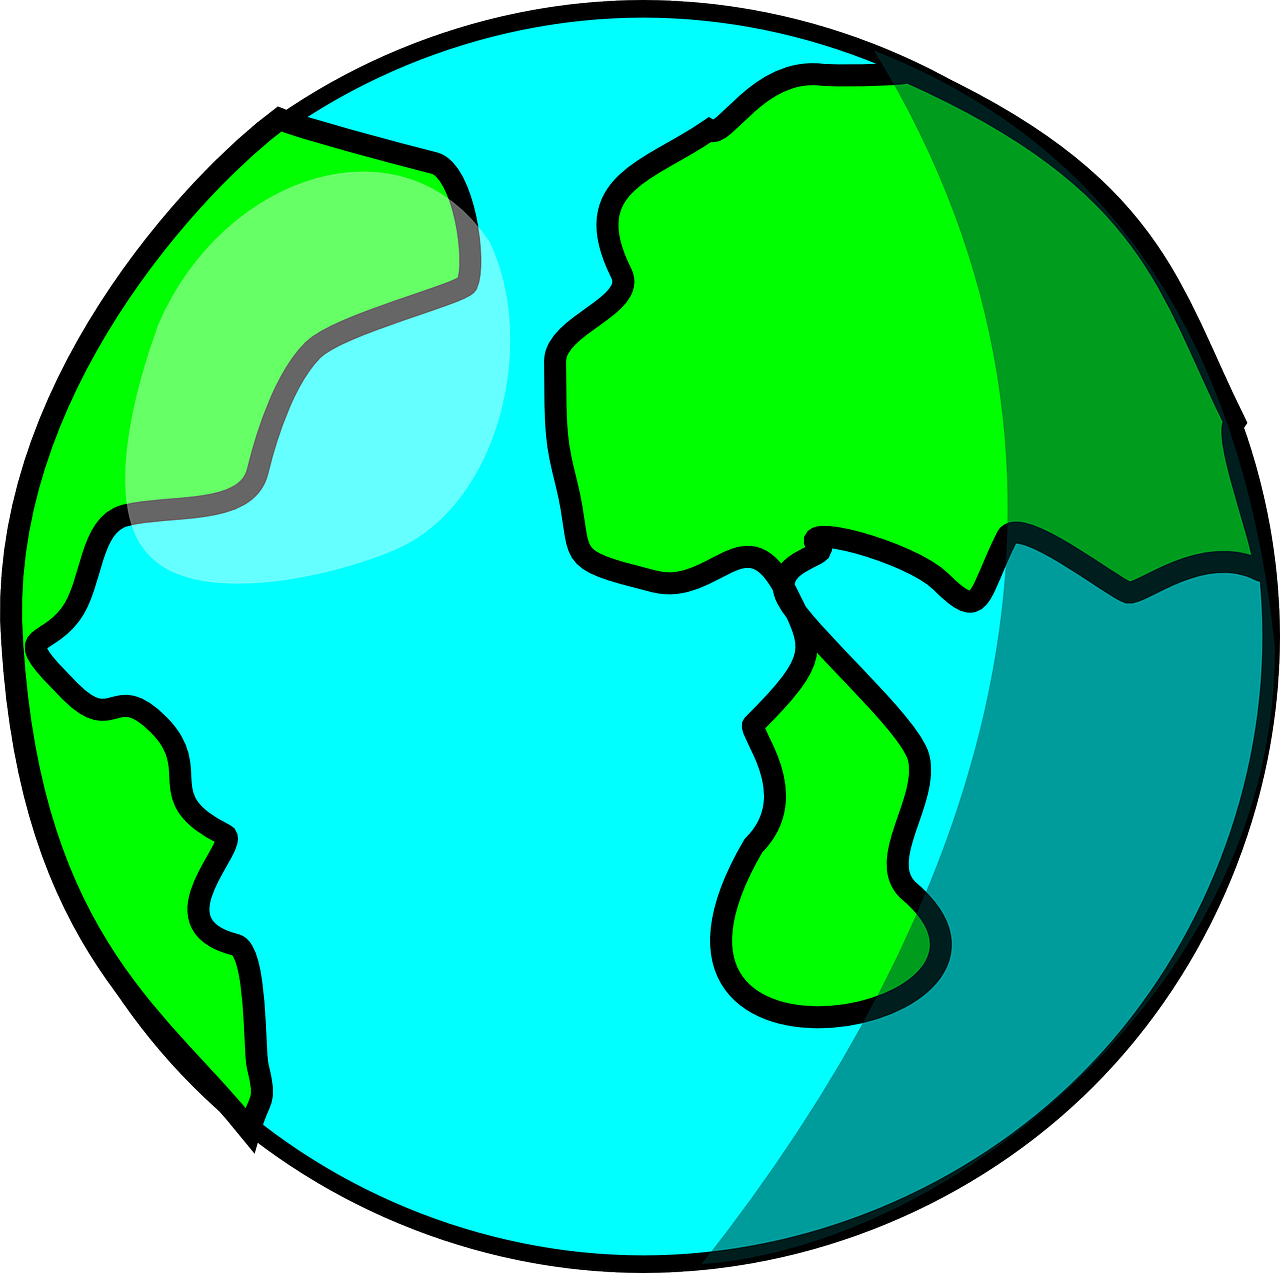 world-154527_1280.png